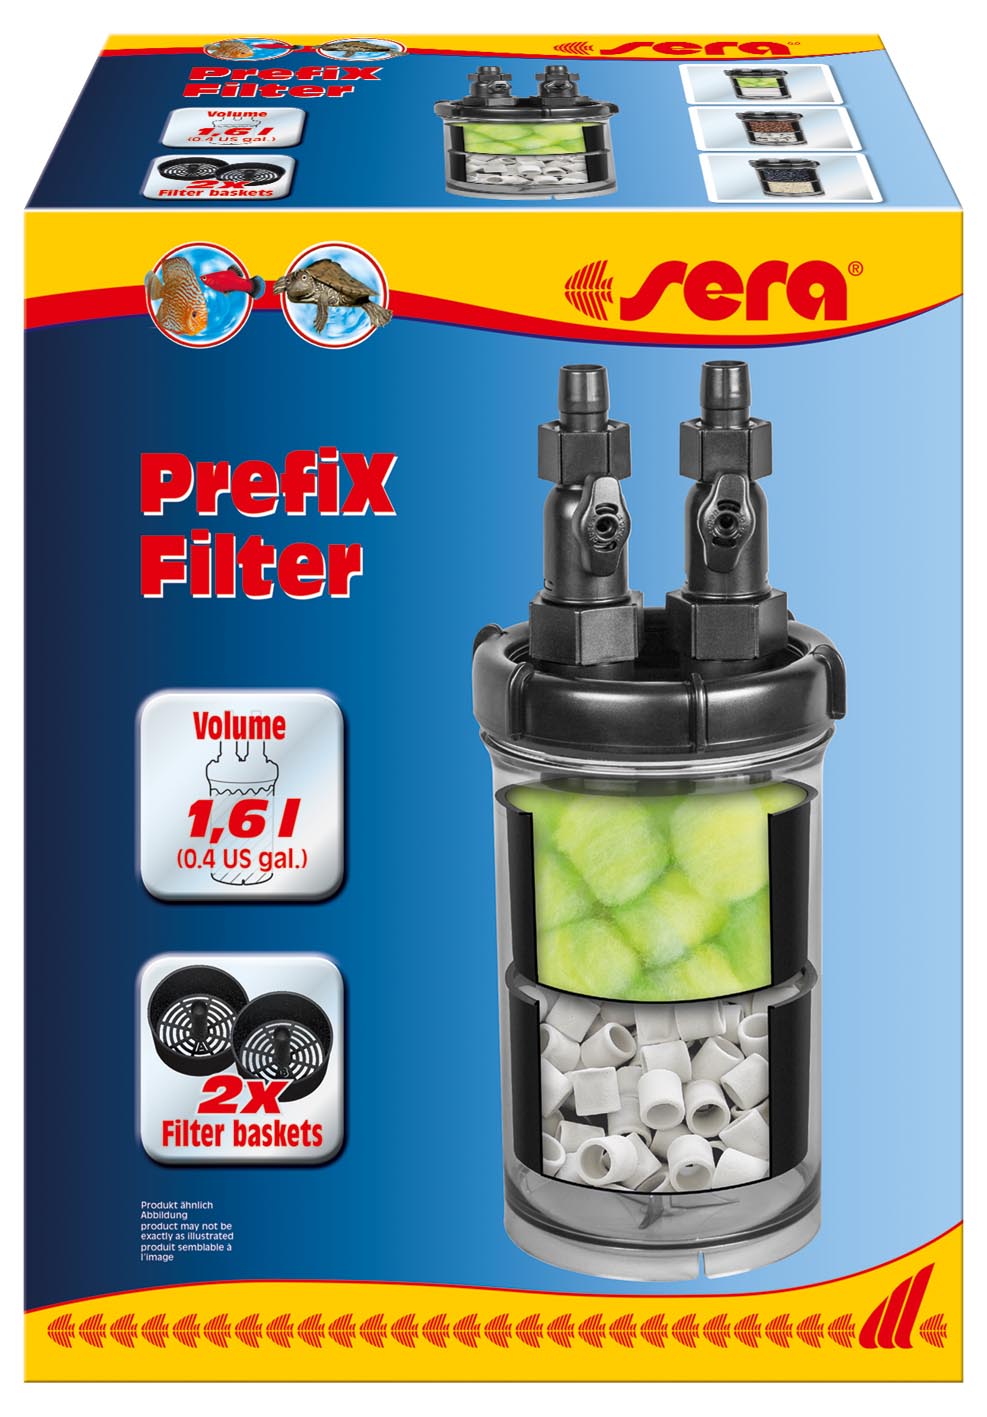 sera's new PrefiX Filter is a non-motorized media container that can be used to expand the filtration volume and capacity of existing filter systems.